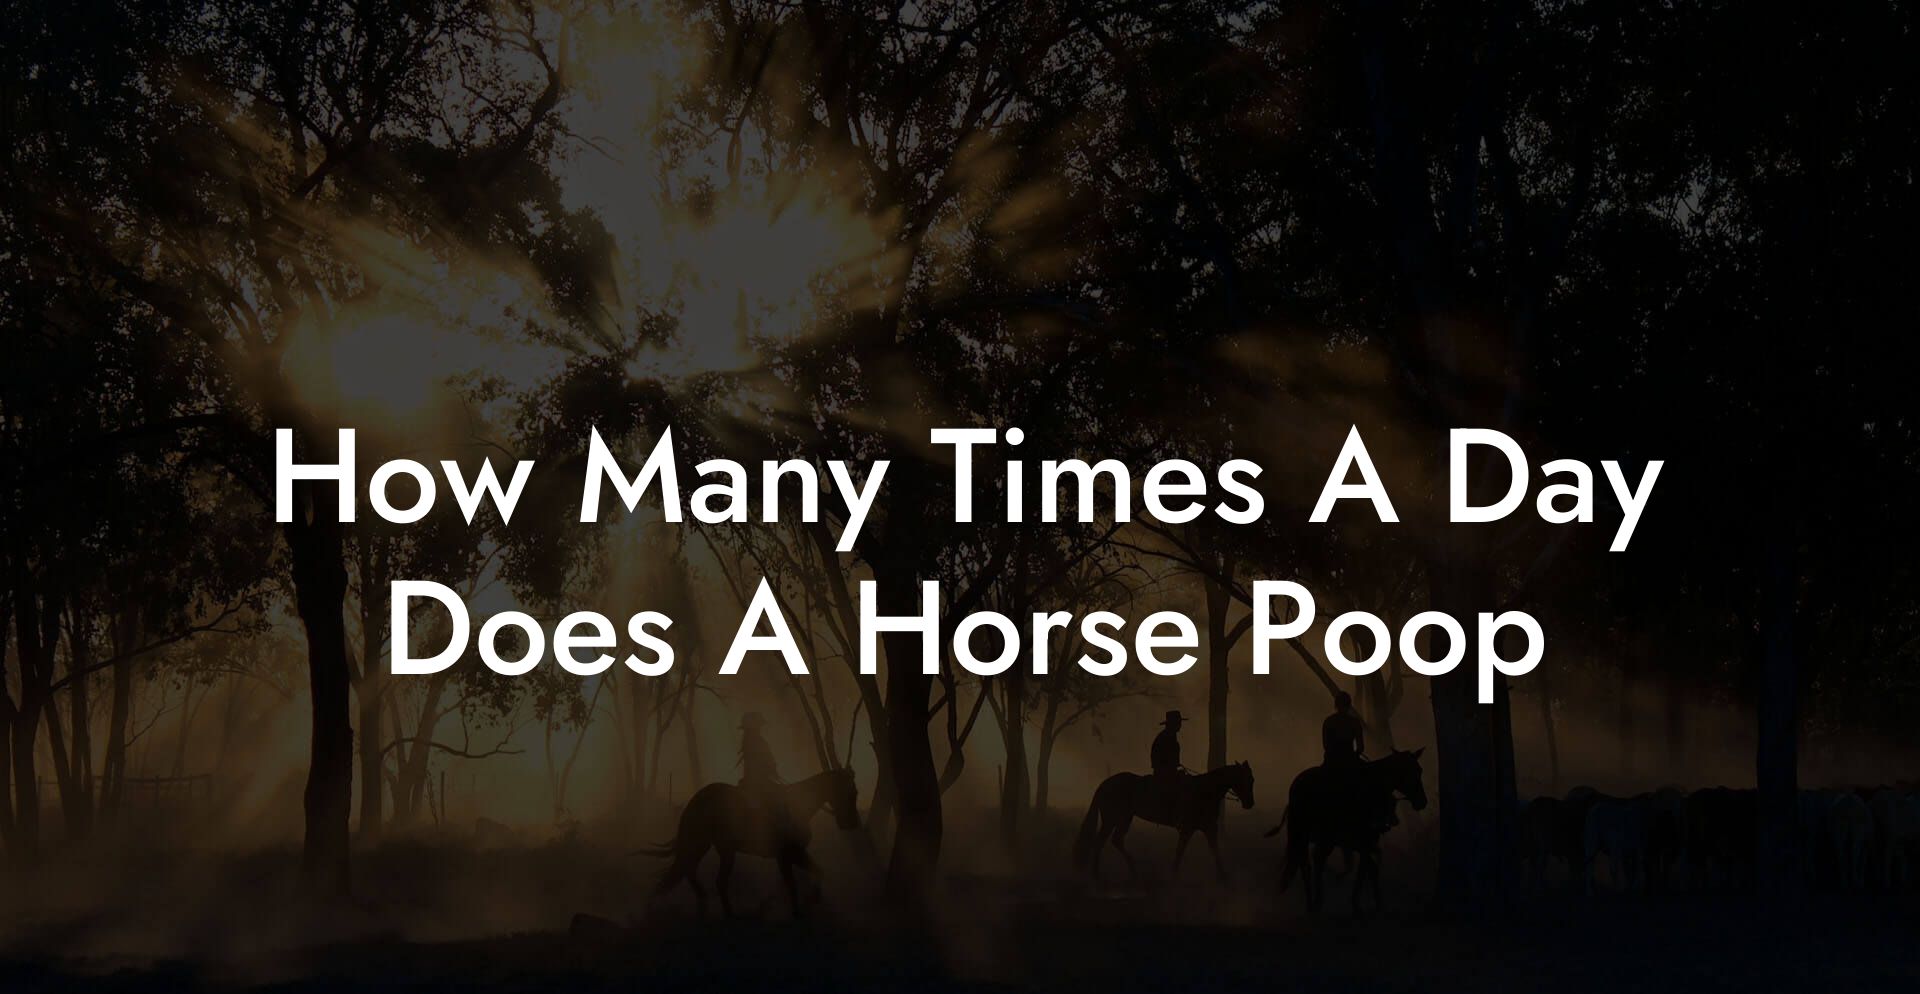 How Many Times A Day Does A Horse Poop